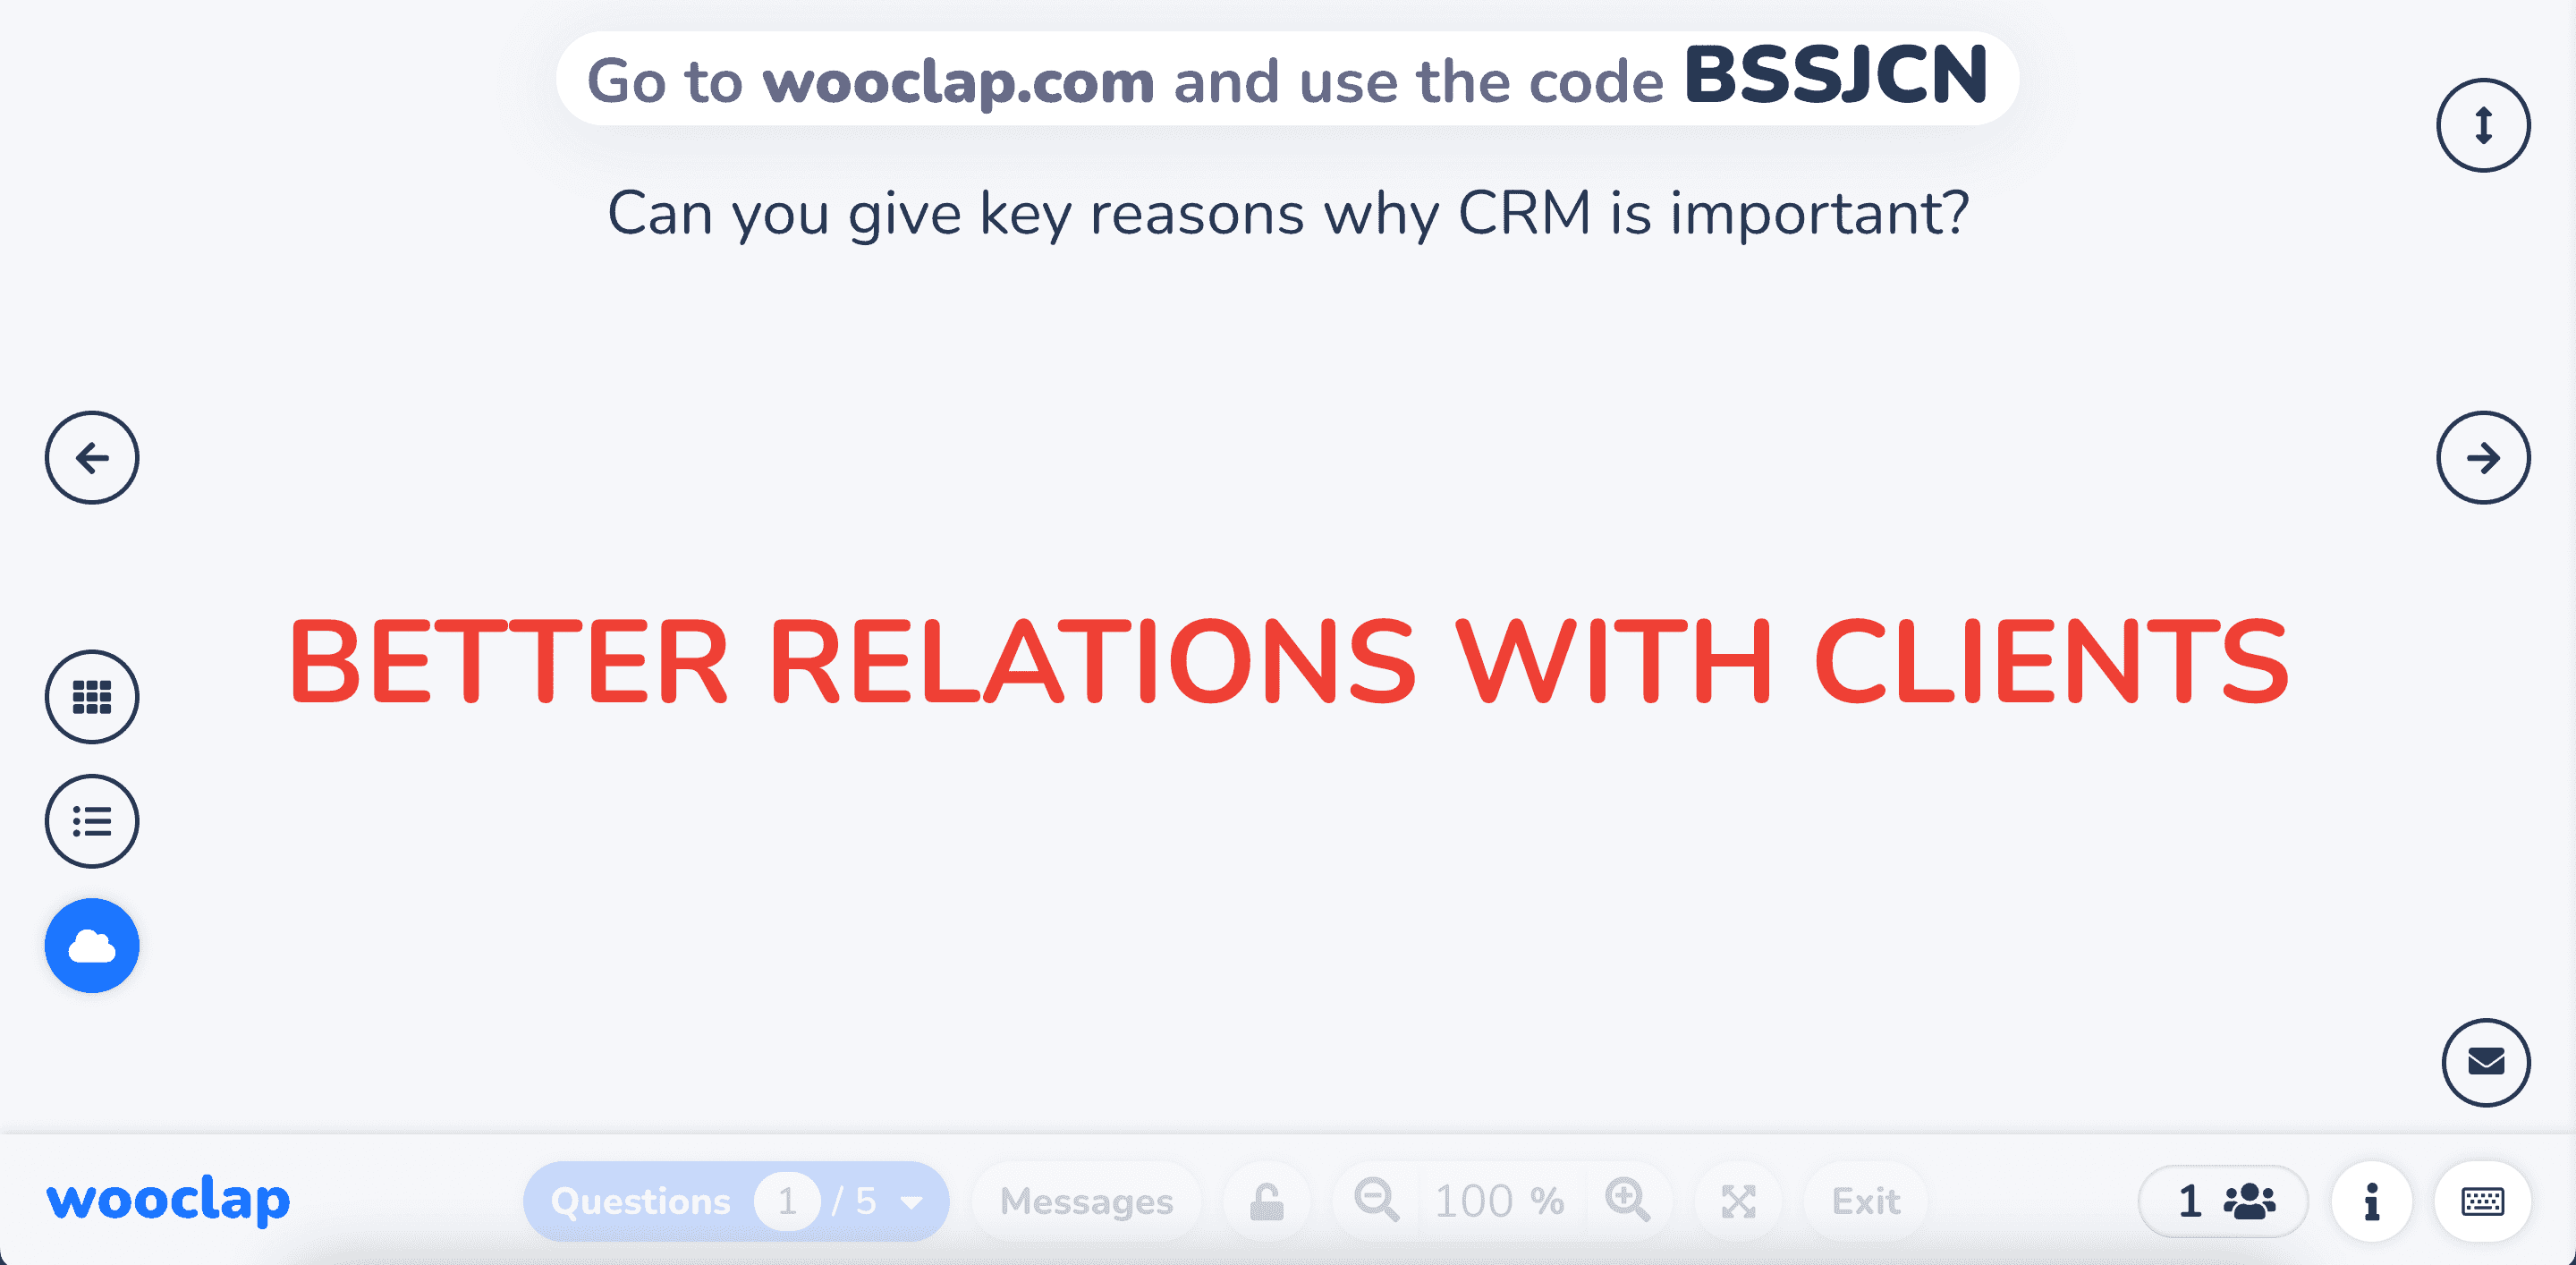 Can you give key reasons why CRM is important?